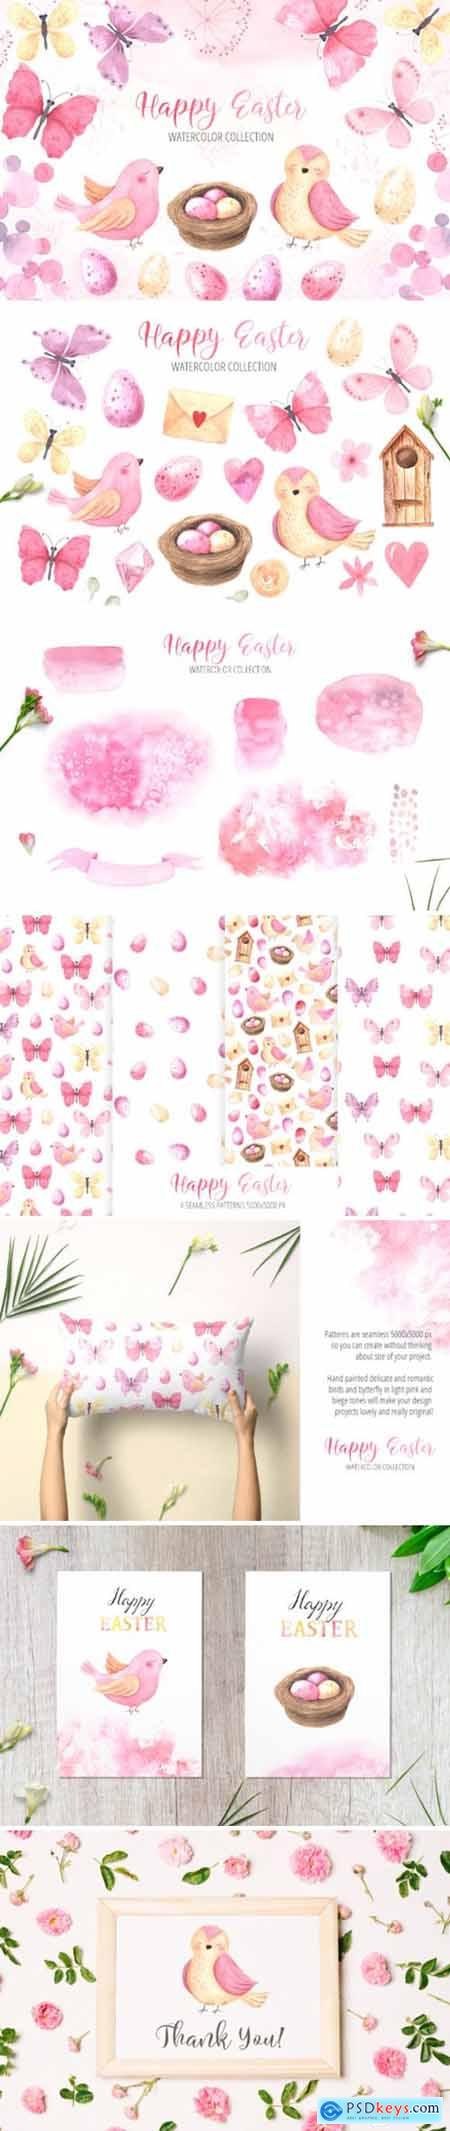 Watercolor Happy Easter Collection 3551847